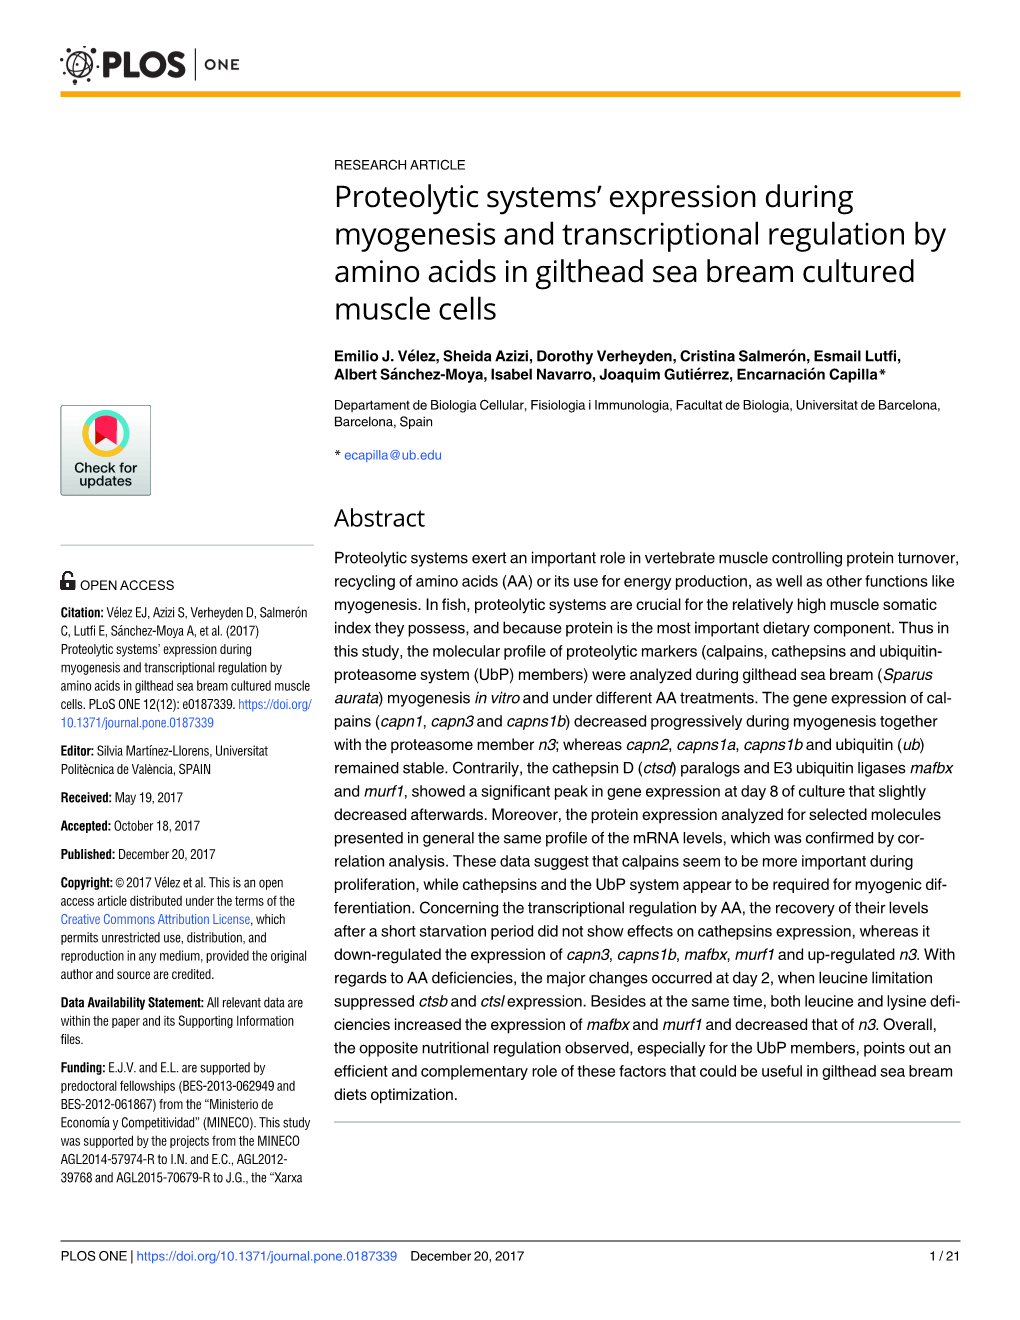 Proteolytic Systems' Expression During Myogenesis and Transcriptional